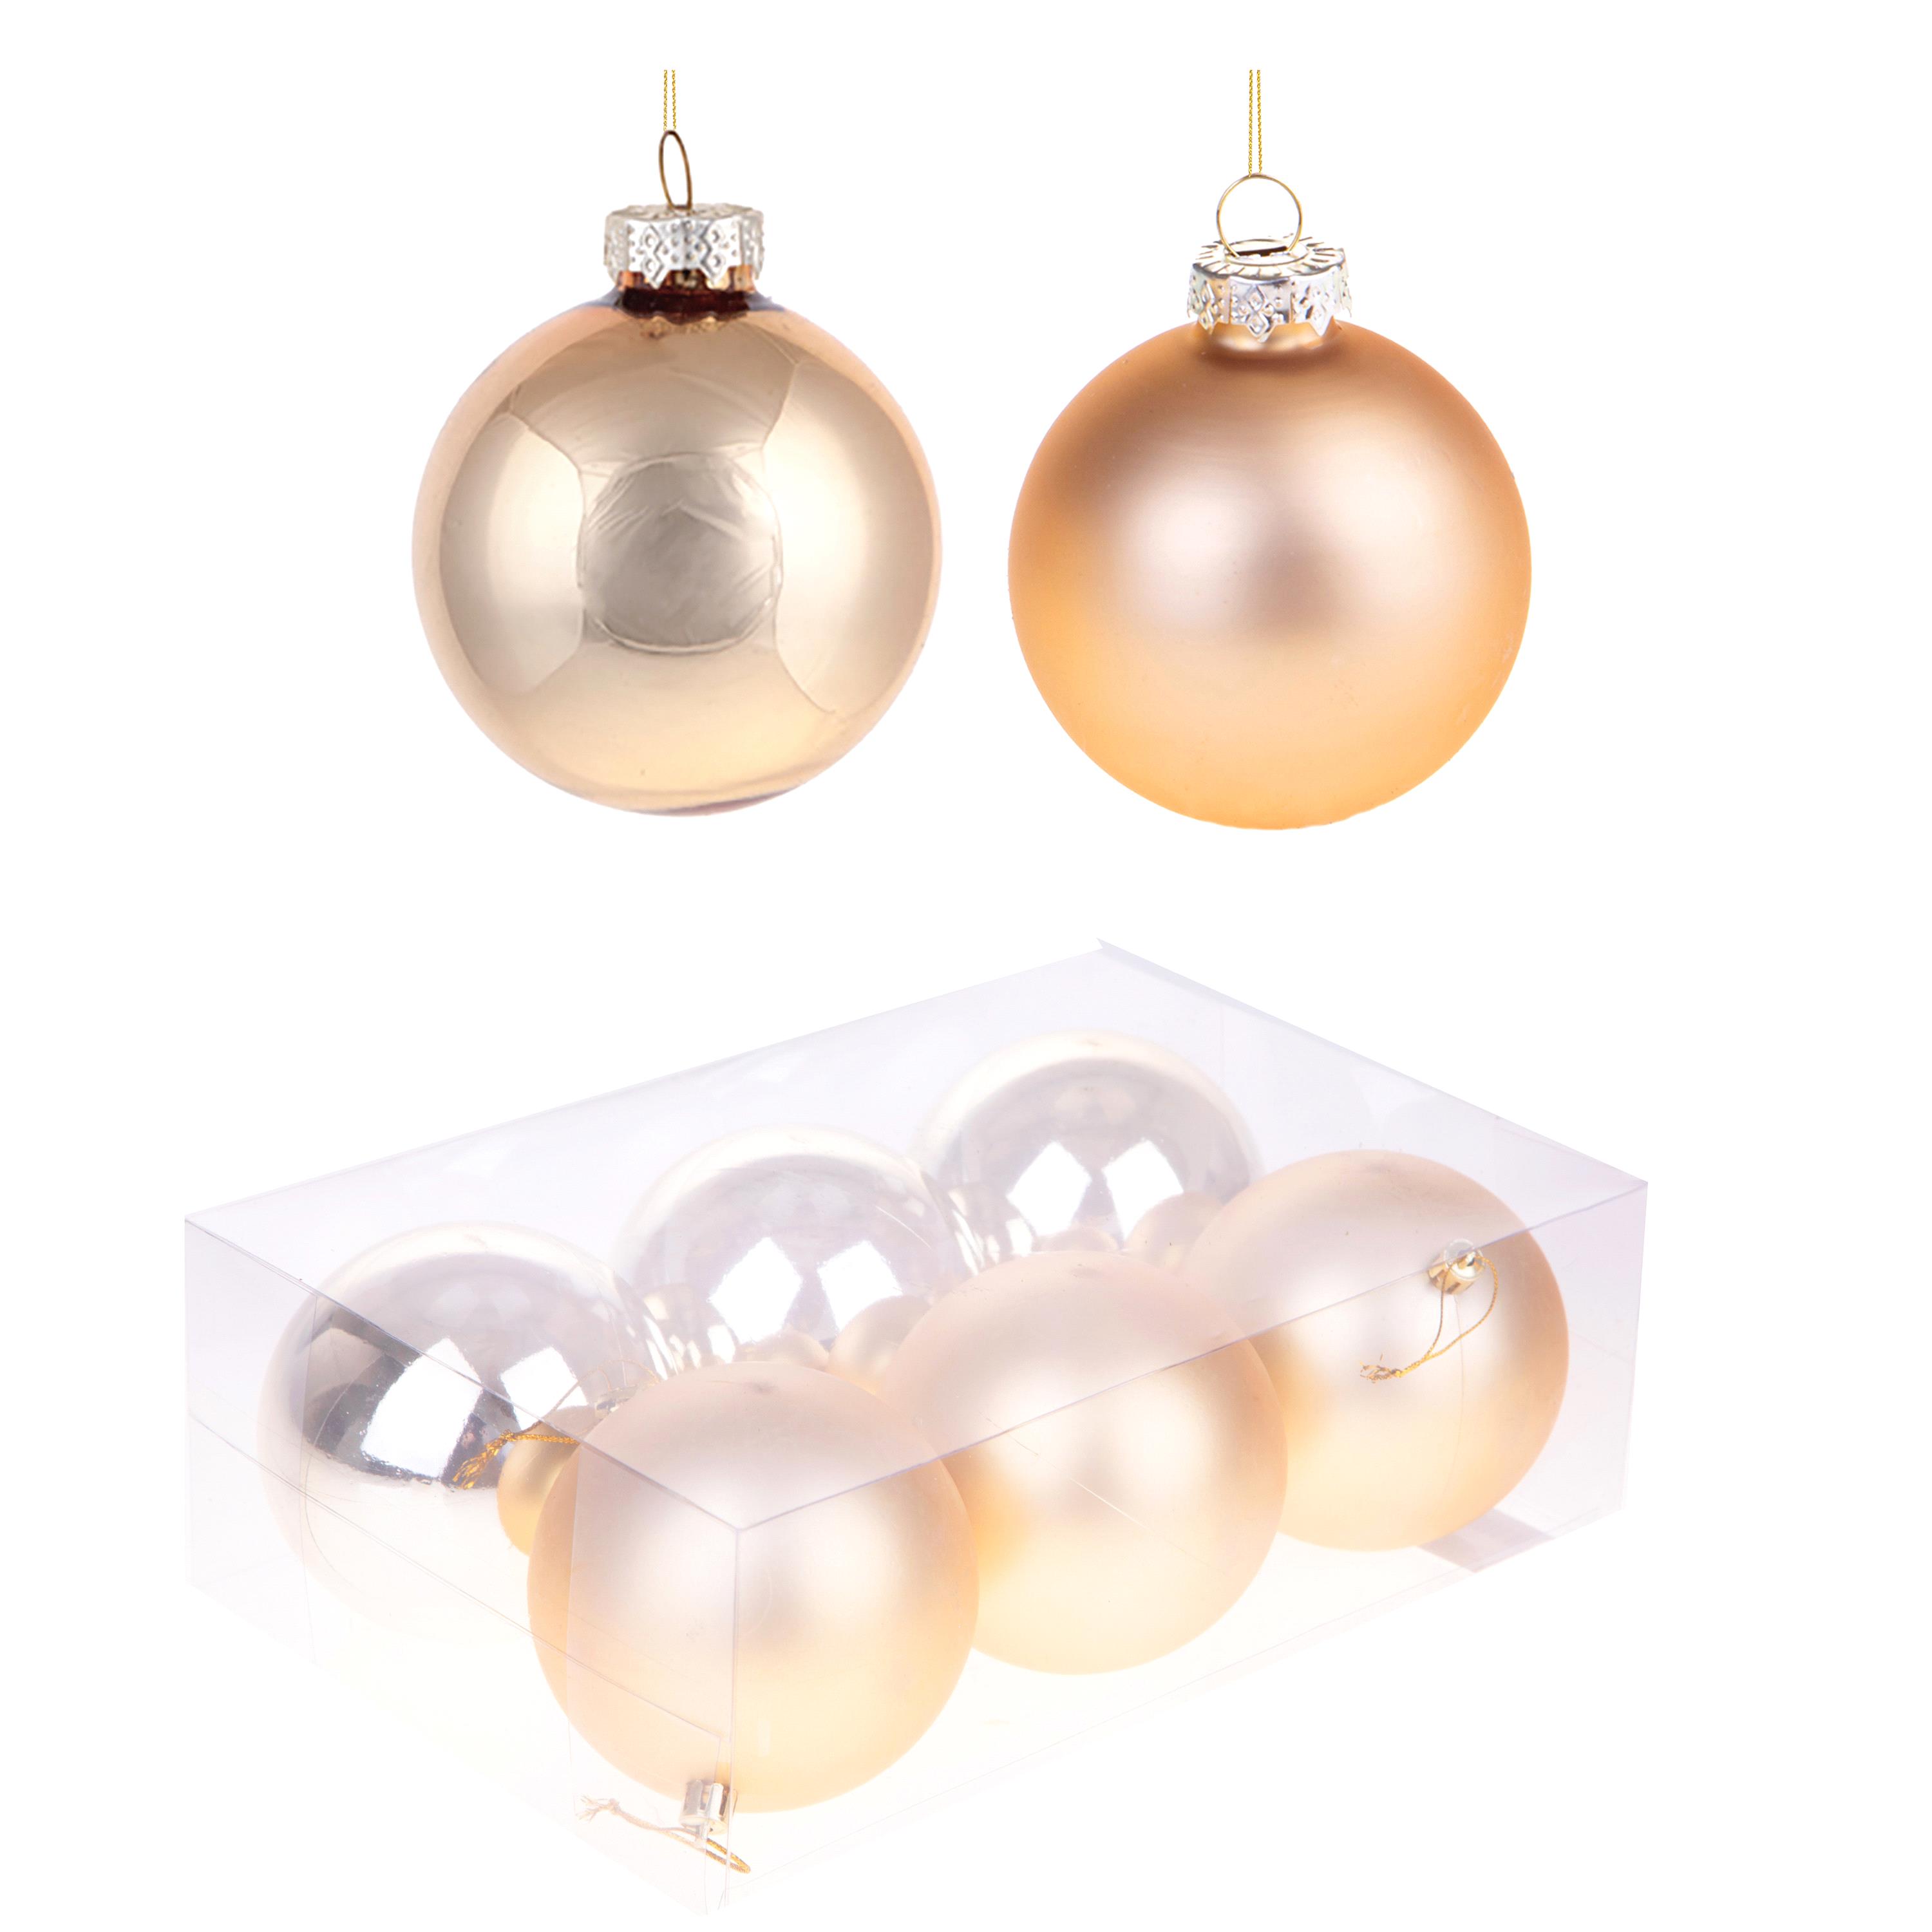 CHRISTMAS ITEMS, HANGING BALLS AND DECORATIONS IN FOAM/PAPER/RESIN, SFERE 6 PZ PLASTICA D.10 CM